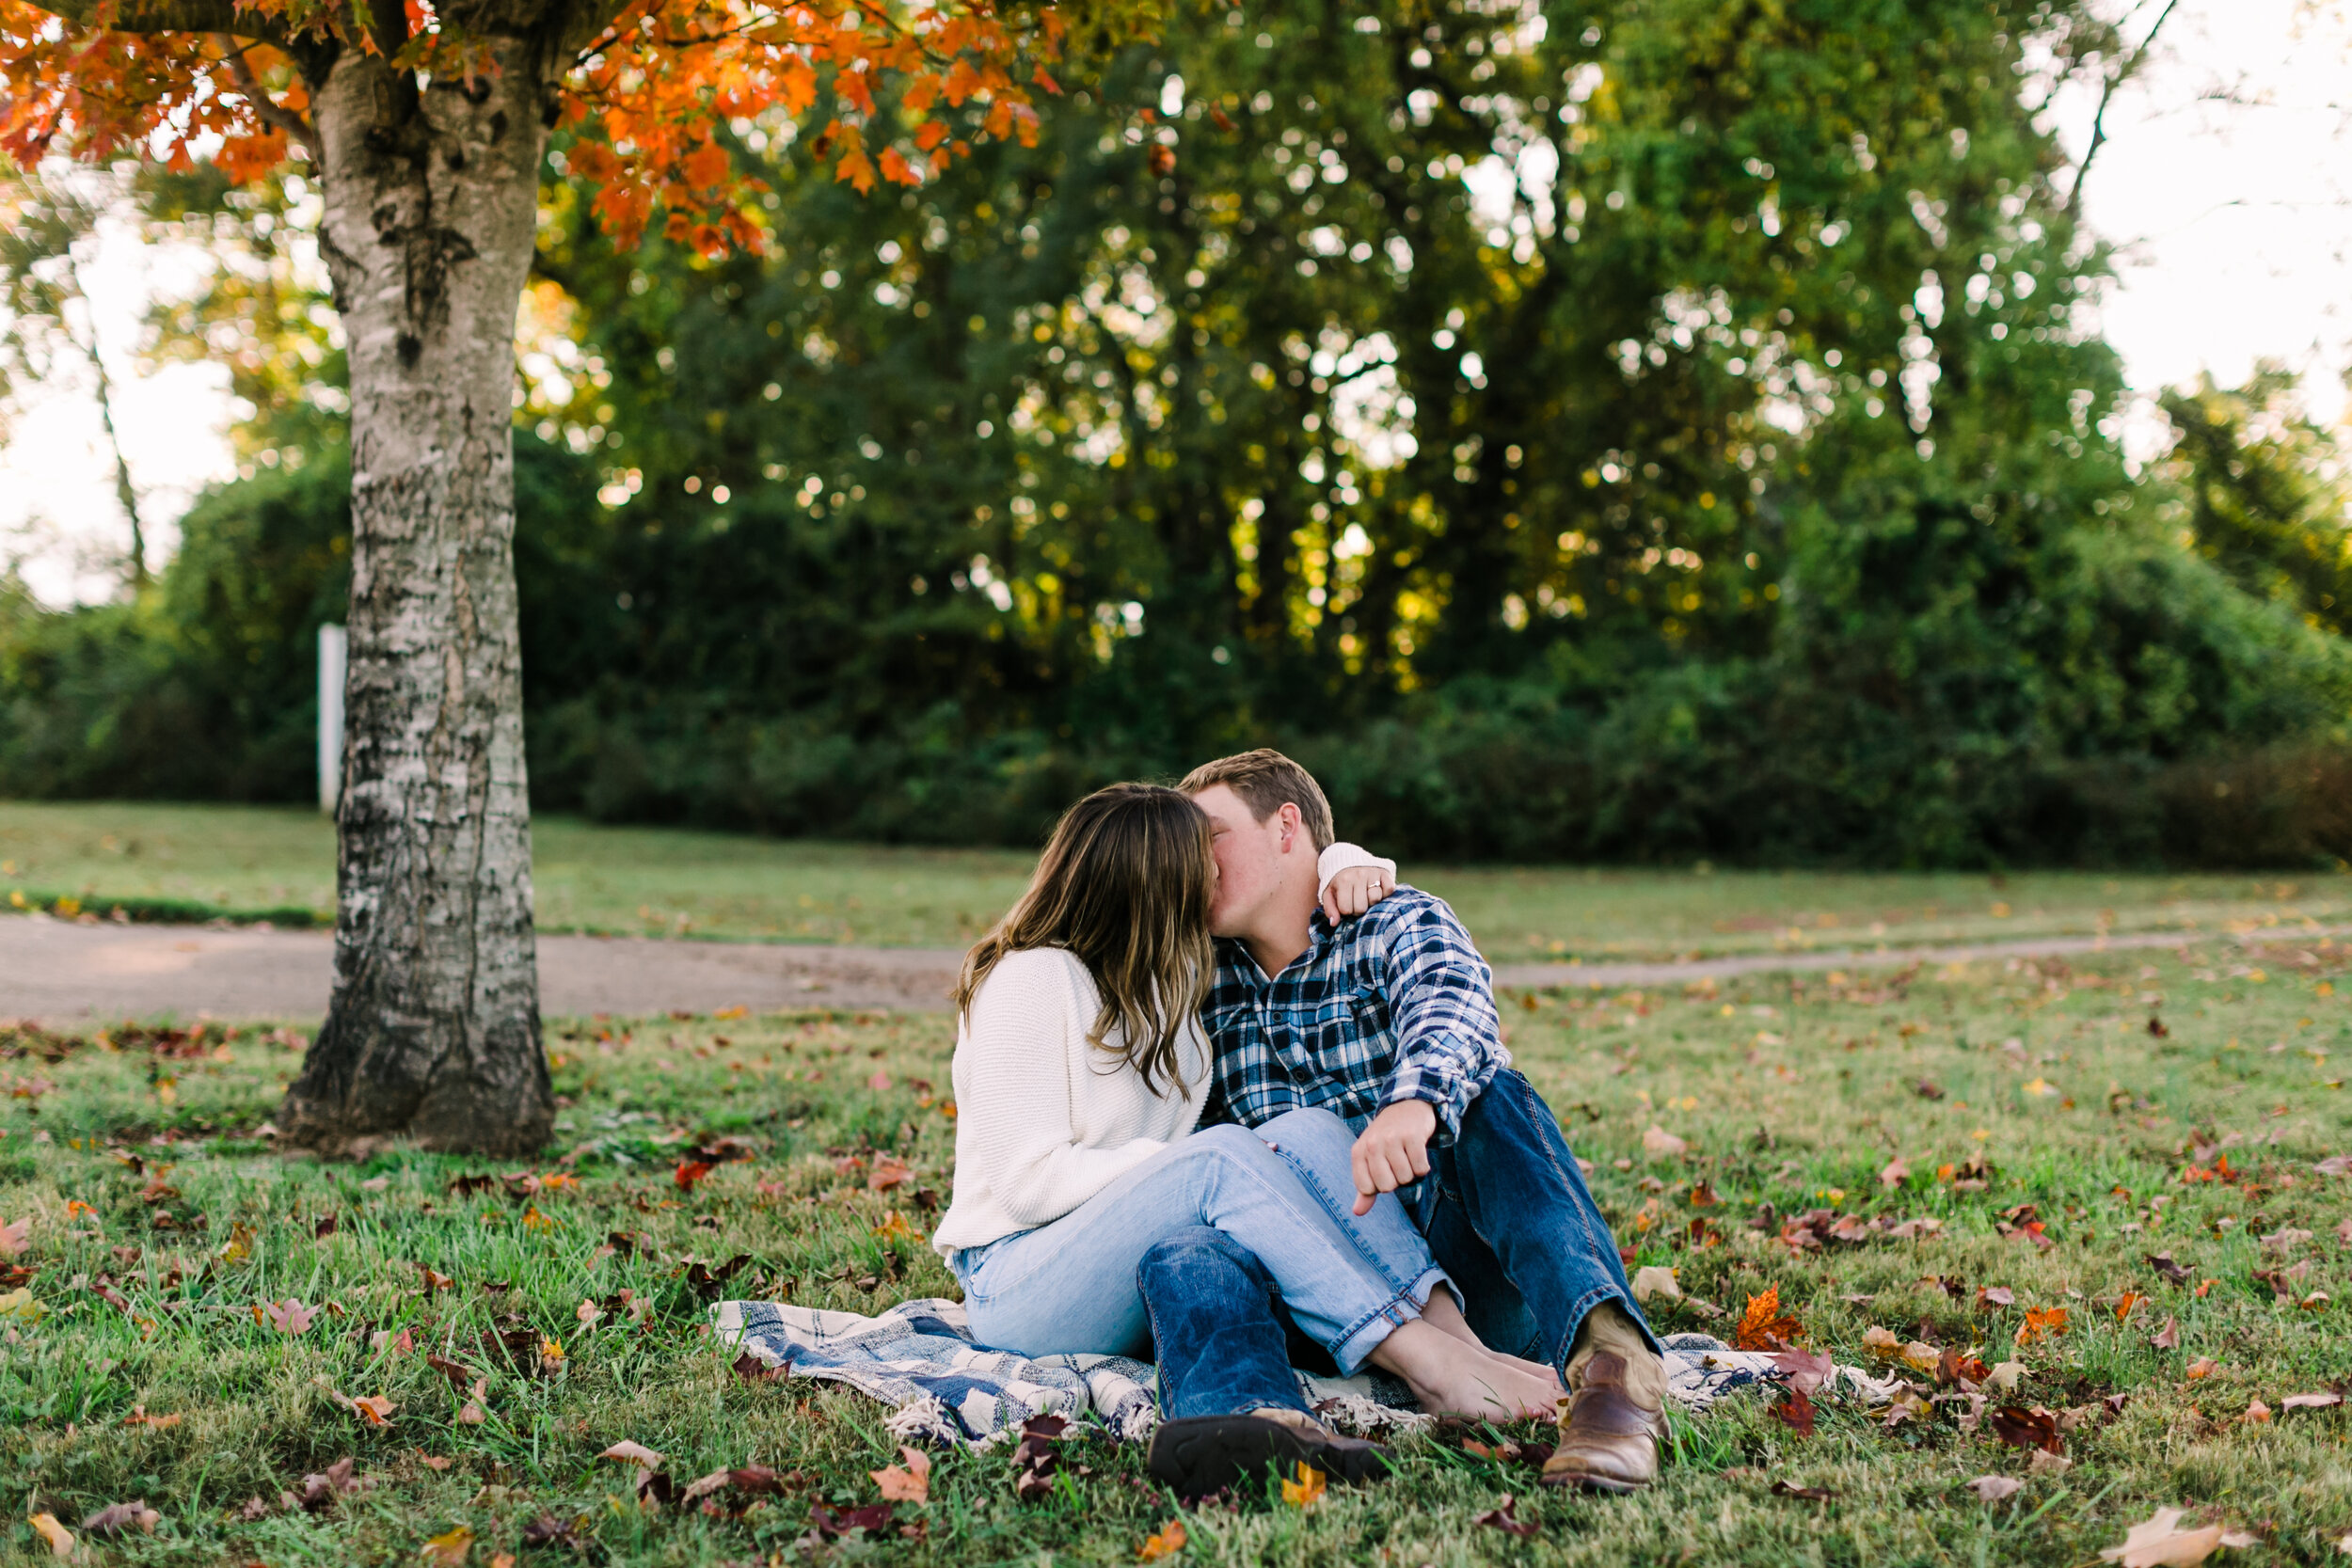 Tennessee+Fall+Engagement+Photos+Puppy (11 of 63).jpg